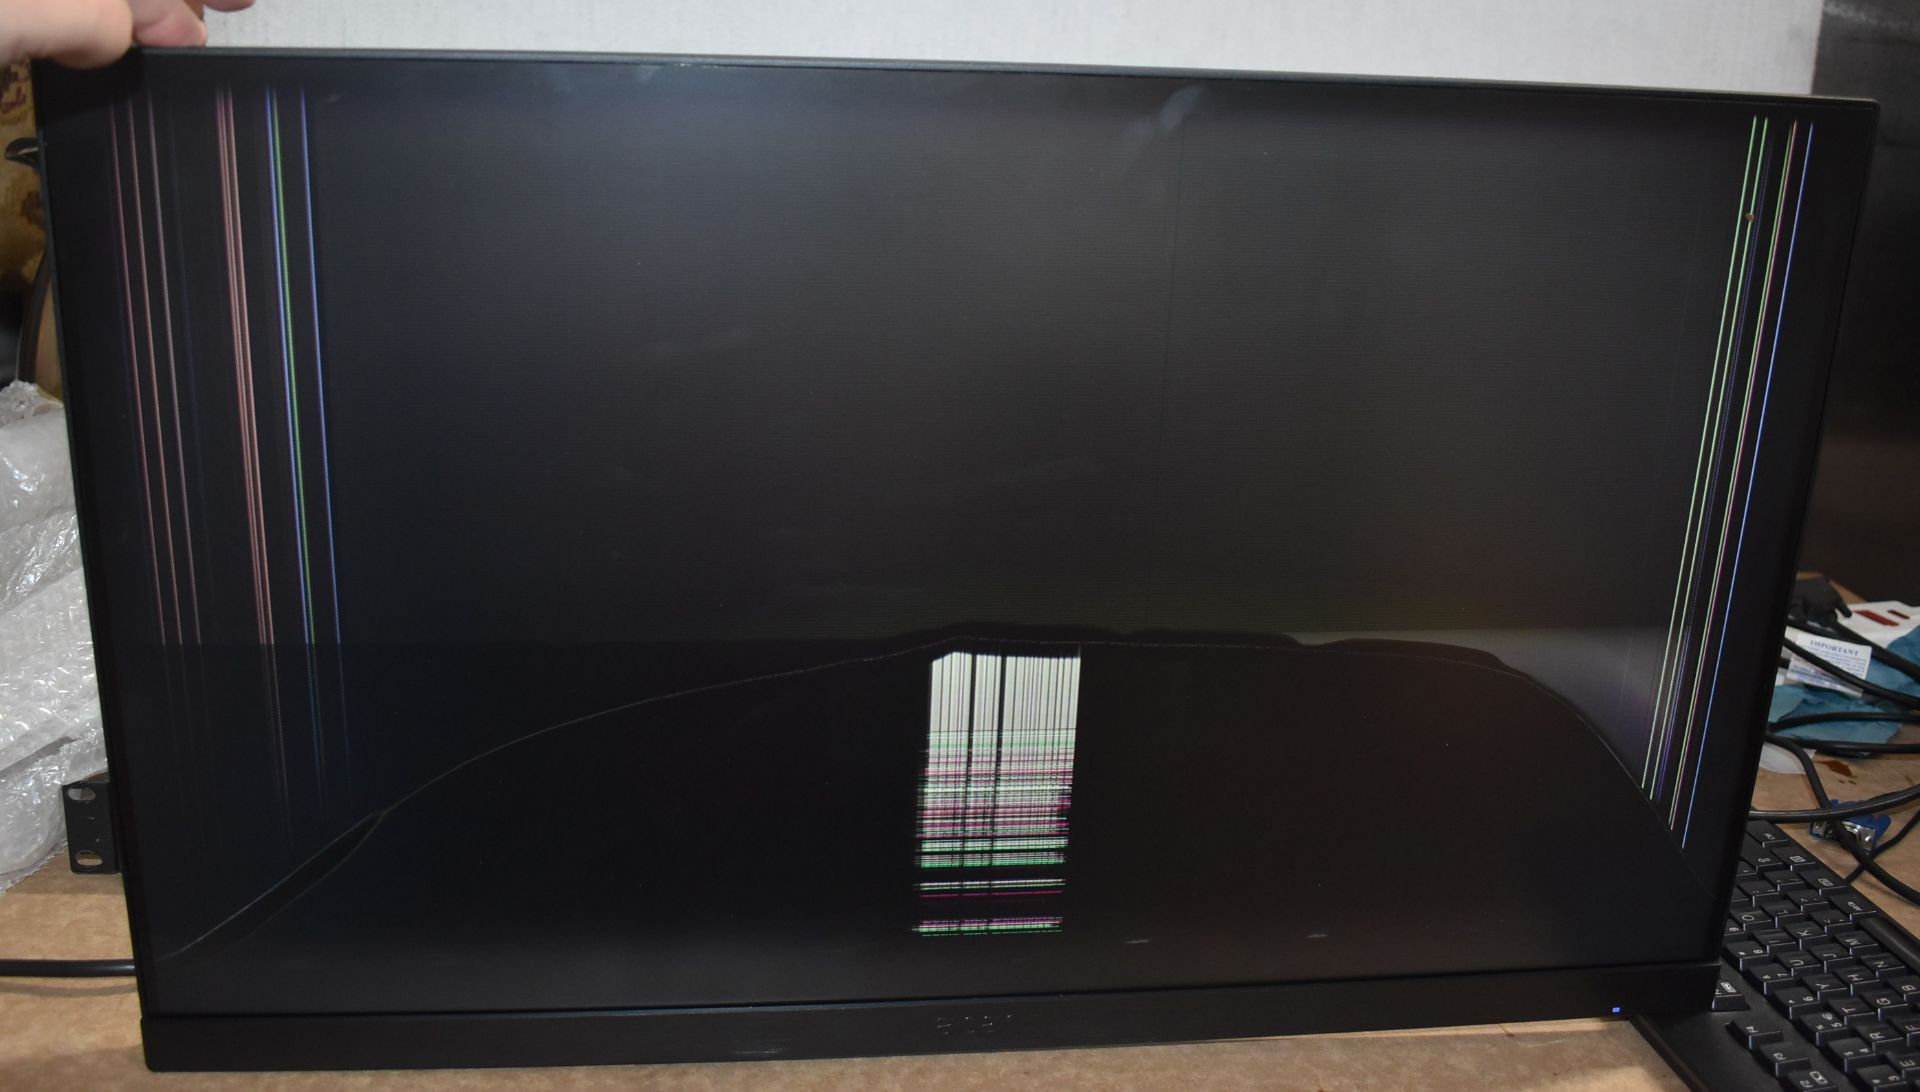 15 x Acer 27 Inch FHD Monitors - Model ET271 - Spares or Repairs With Damaged Screens - Ref: - Image 22 of 22